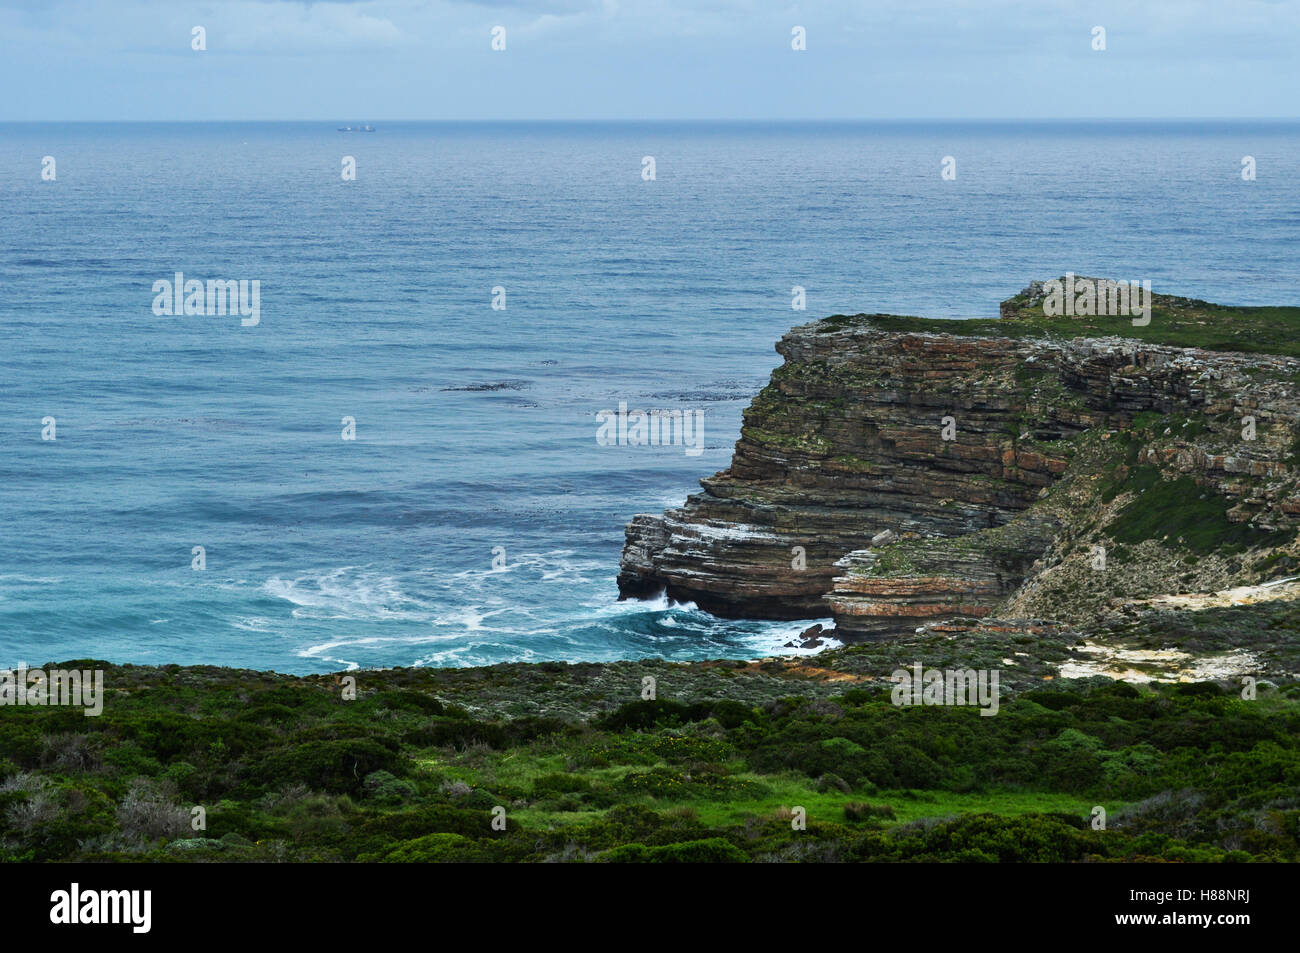 South Africa: panoramic view of the Cape of Good Hope landscape in the reserve of the rocky headland on the Atlantic coast of Cape Peninsula Stock Photo